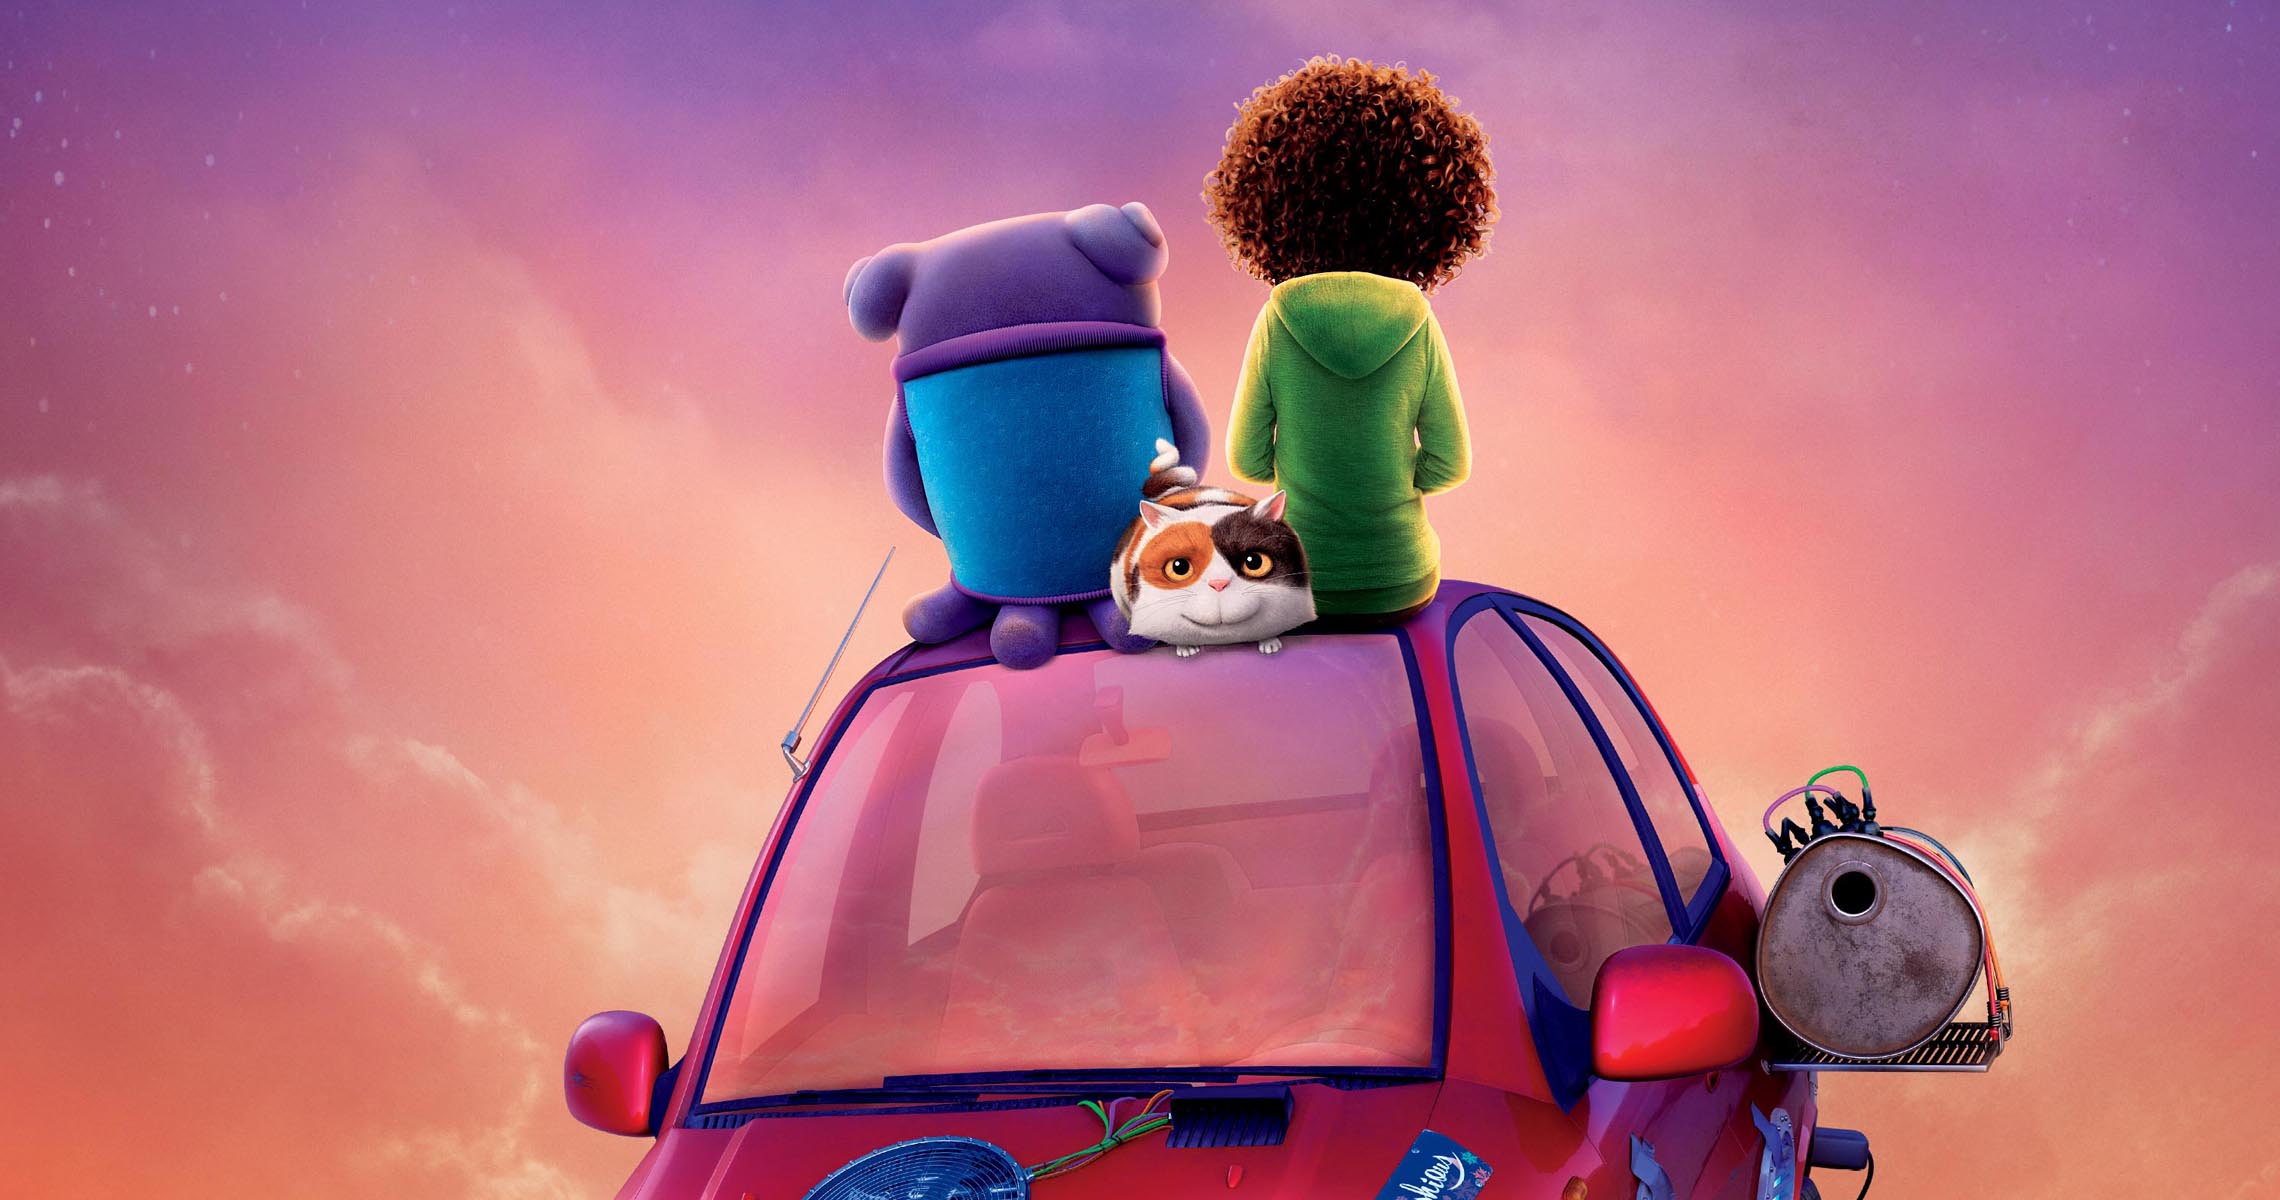 Rihanna Gives Voice to Pint-Size Heroine in Animated 'Home' - Front Row  Features